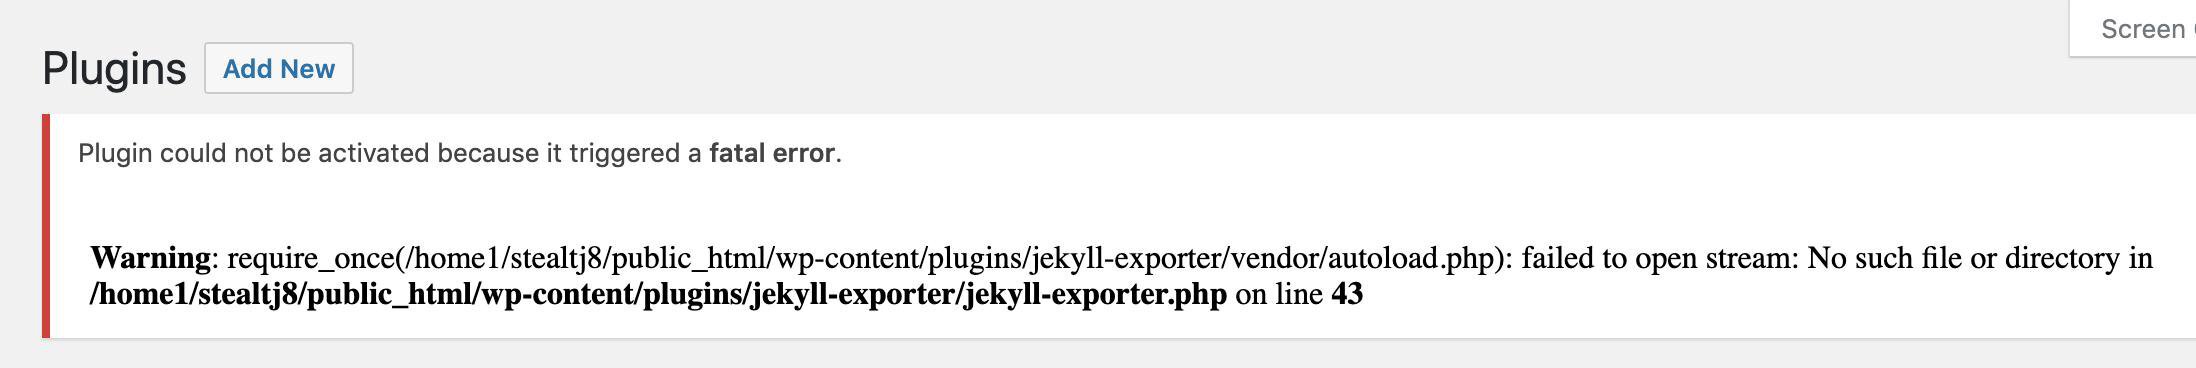 WordPress Php Error - "Plugin could not be activated"